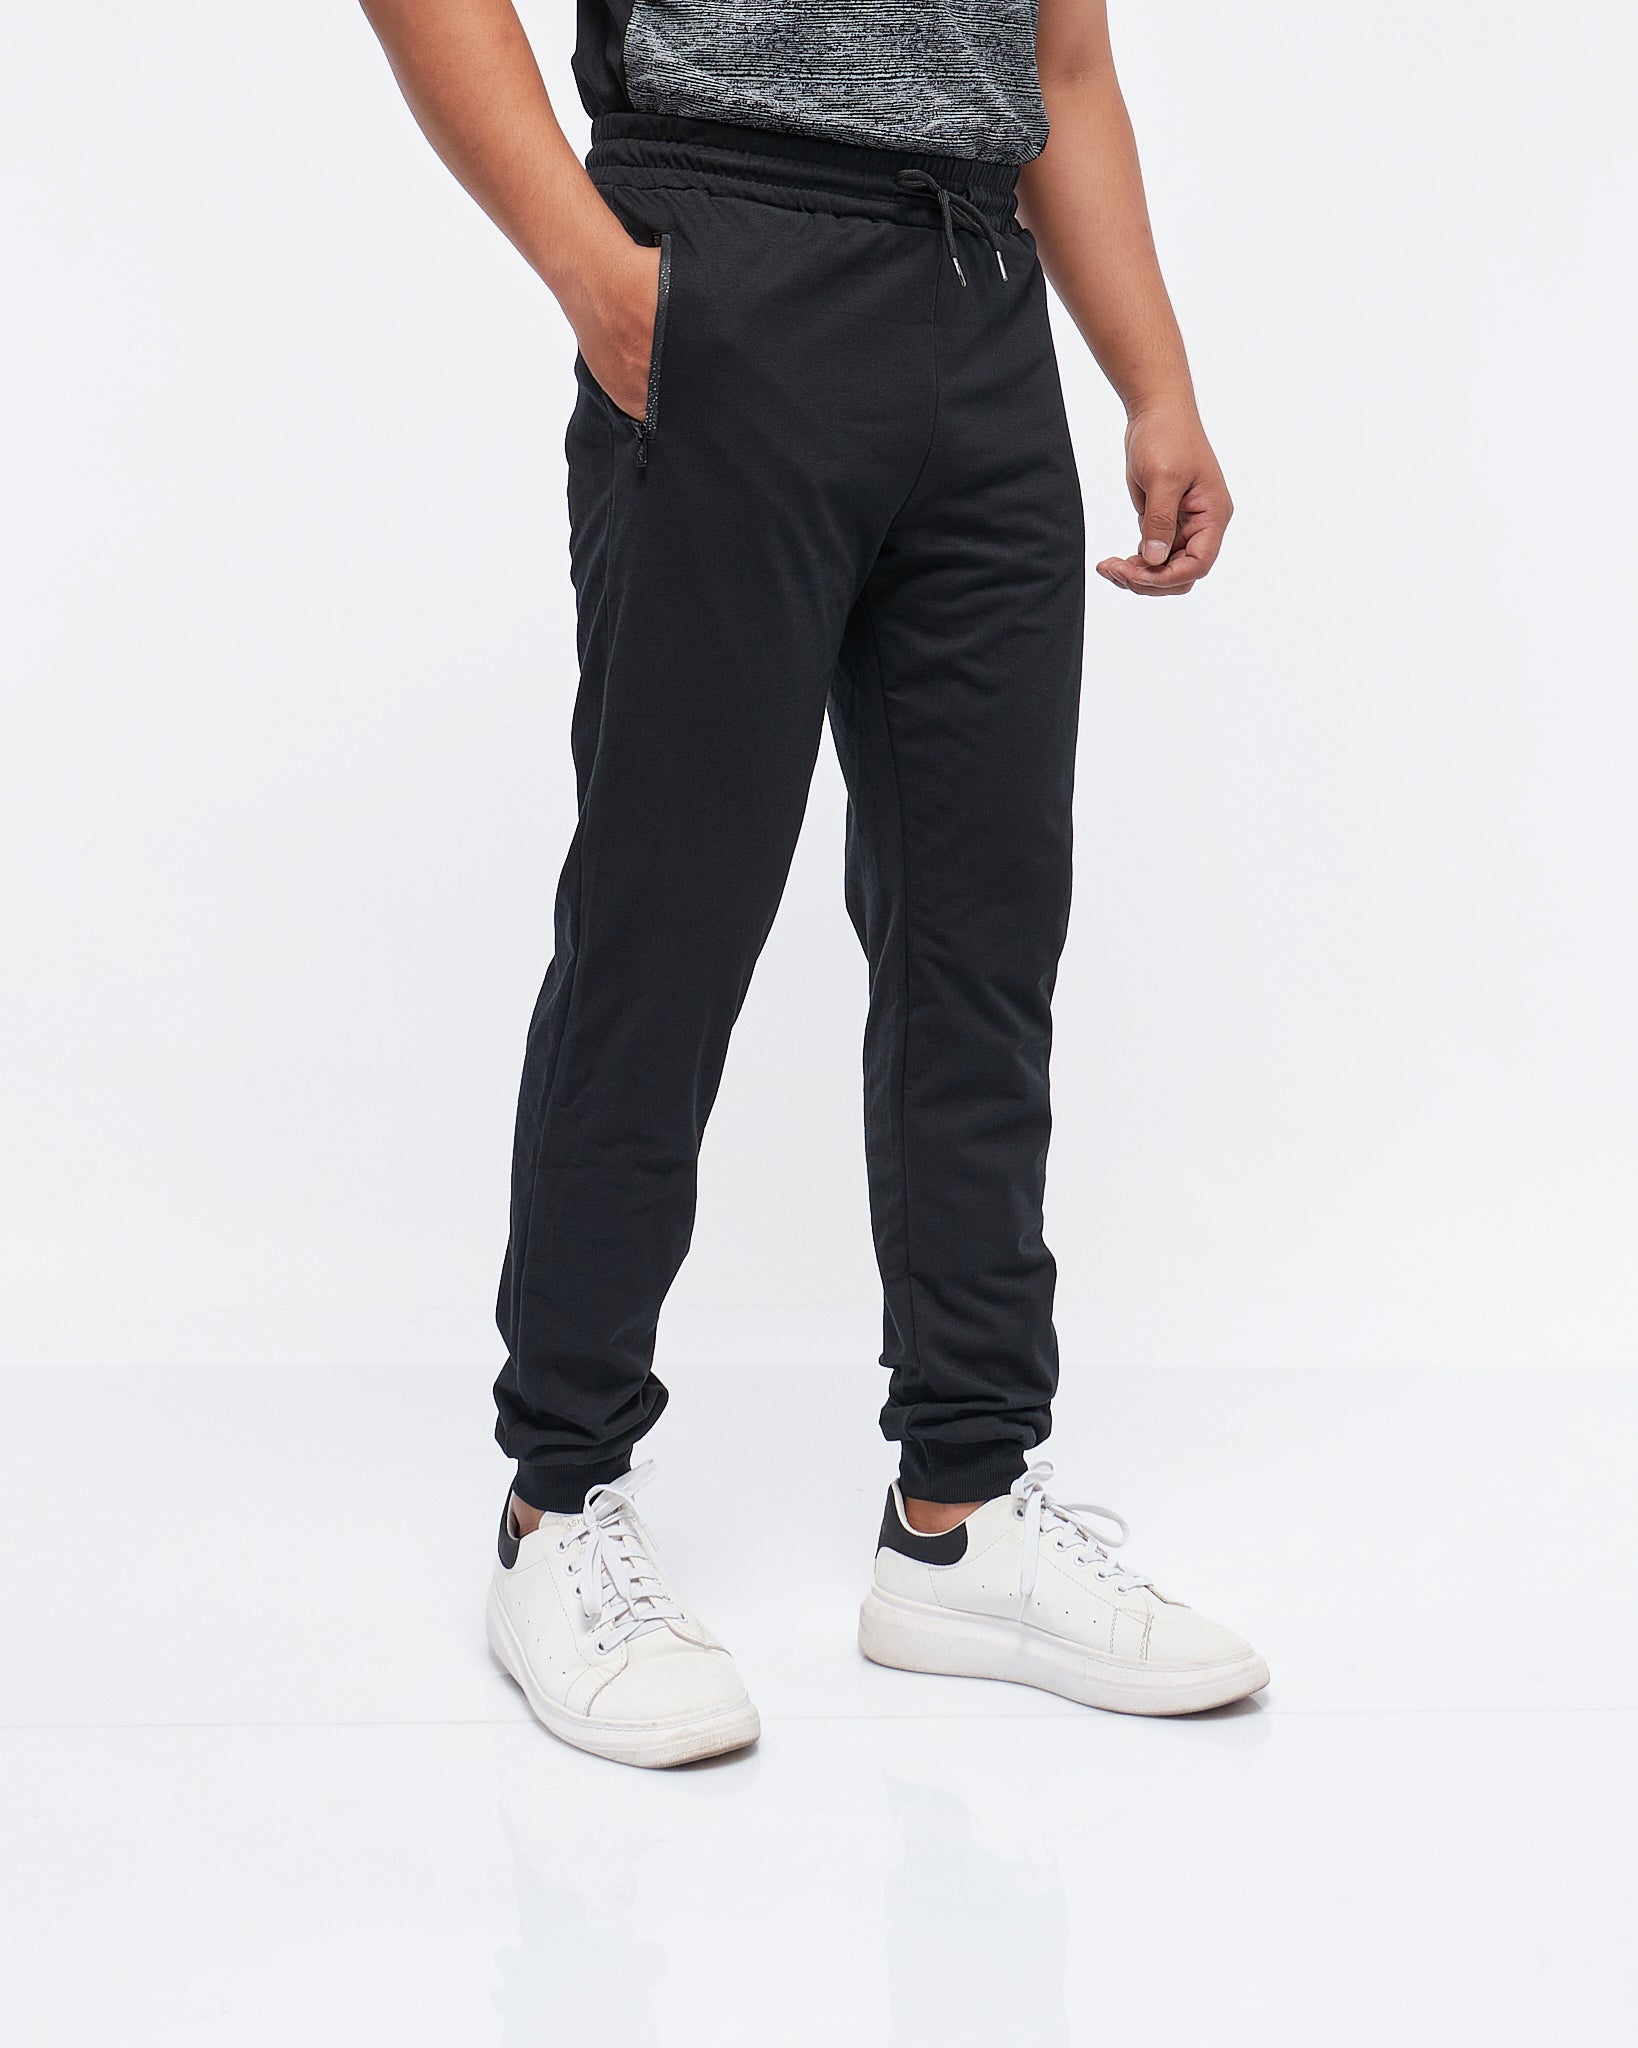 MOI OUTFIT-Left Logo Printed Men Joggers 17.90